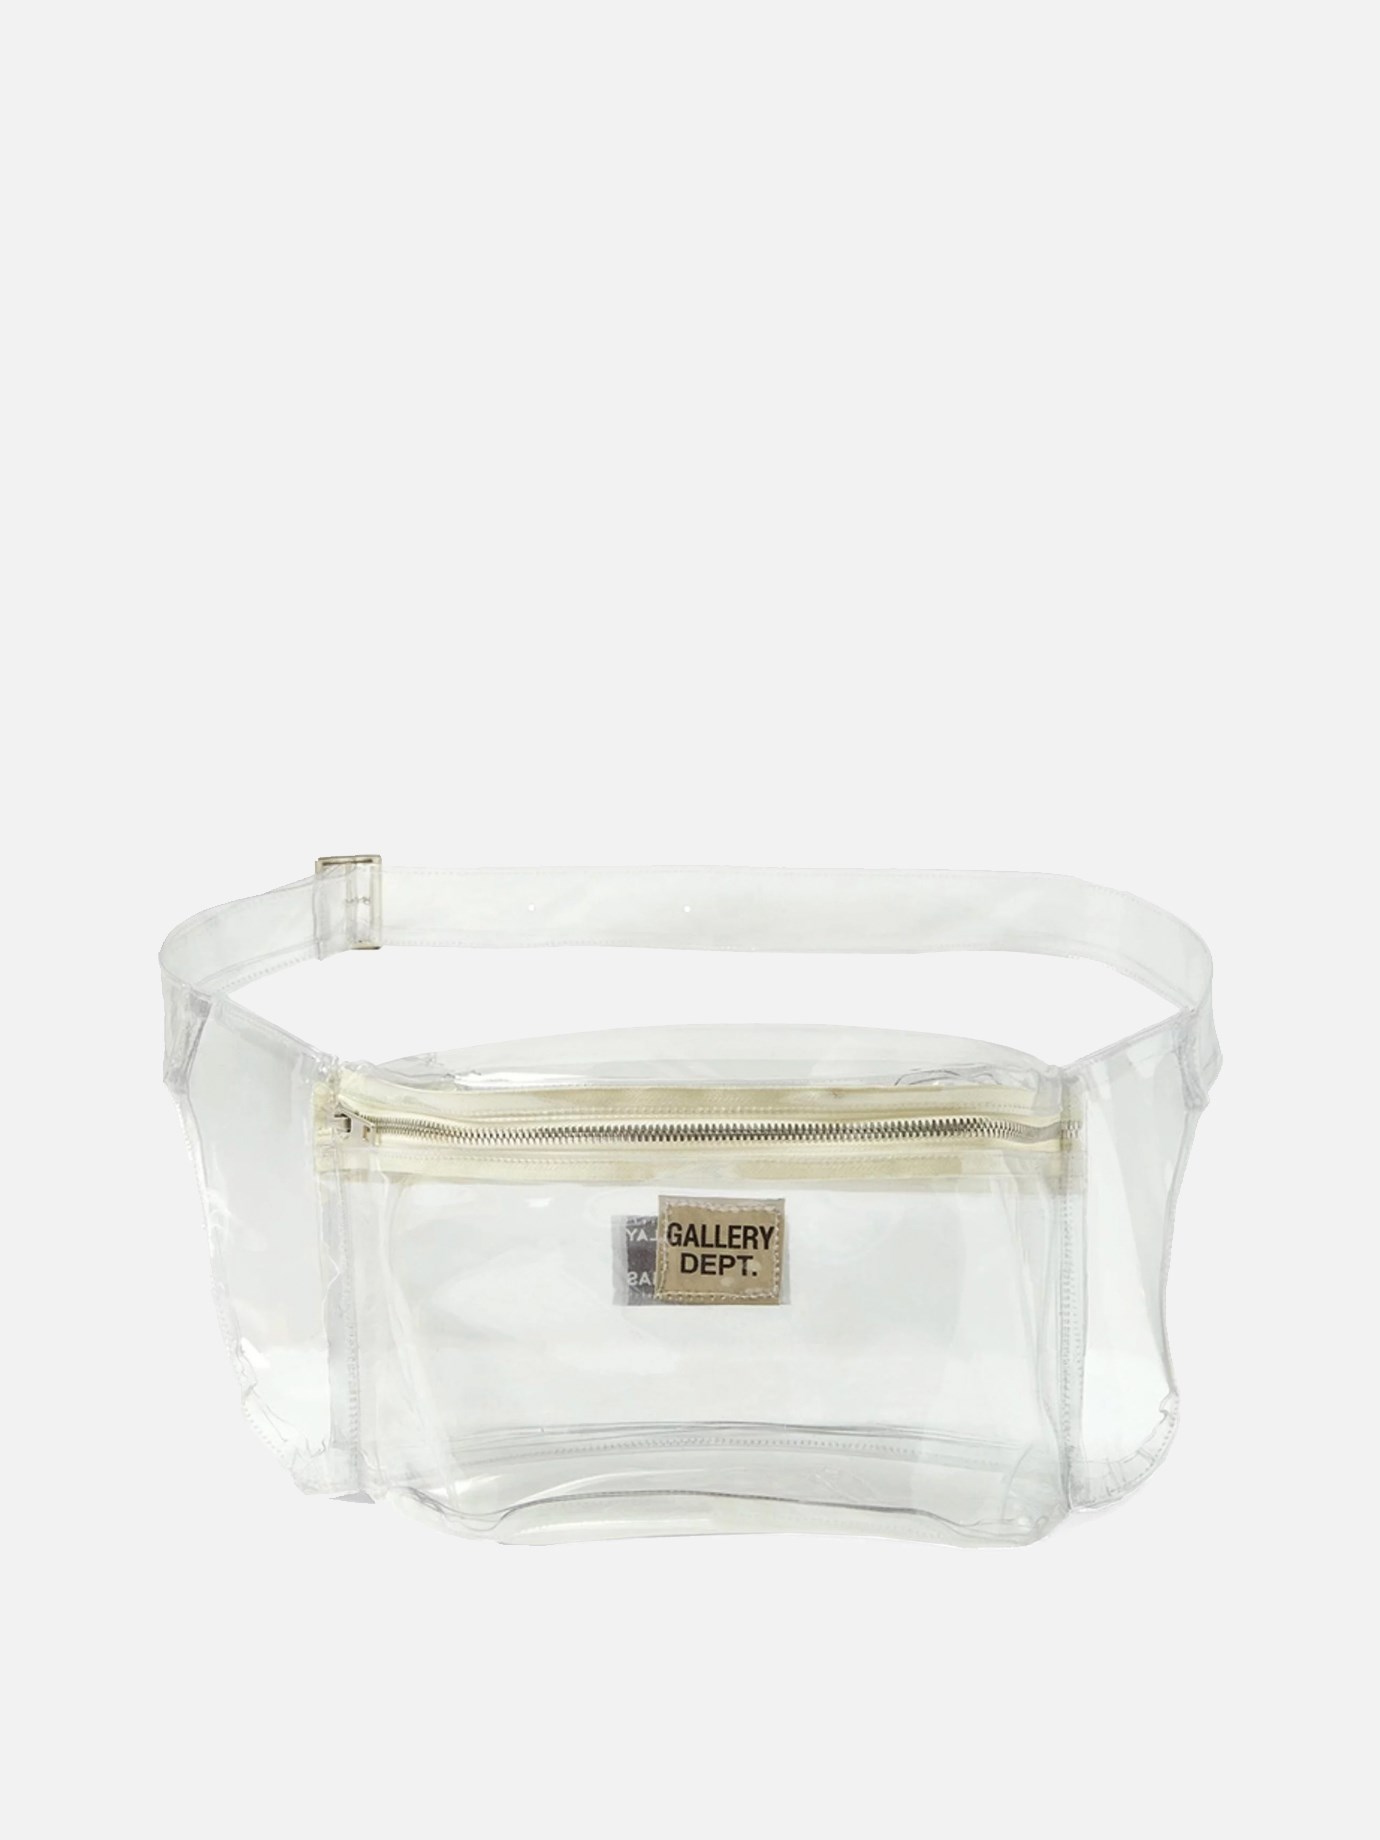  Clear  belt bagby Gallery Dept. - 4